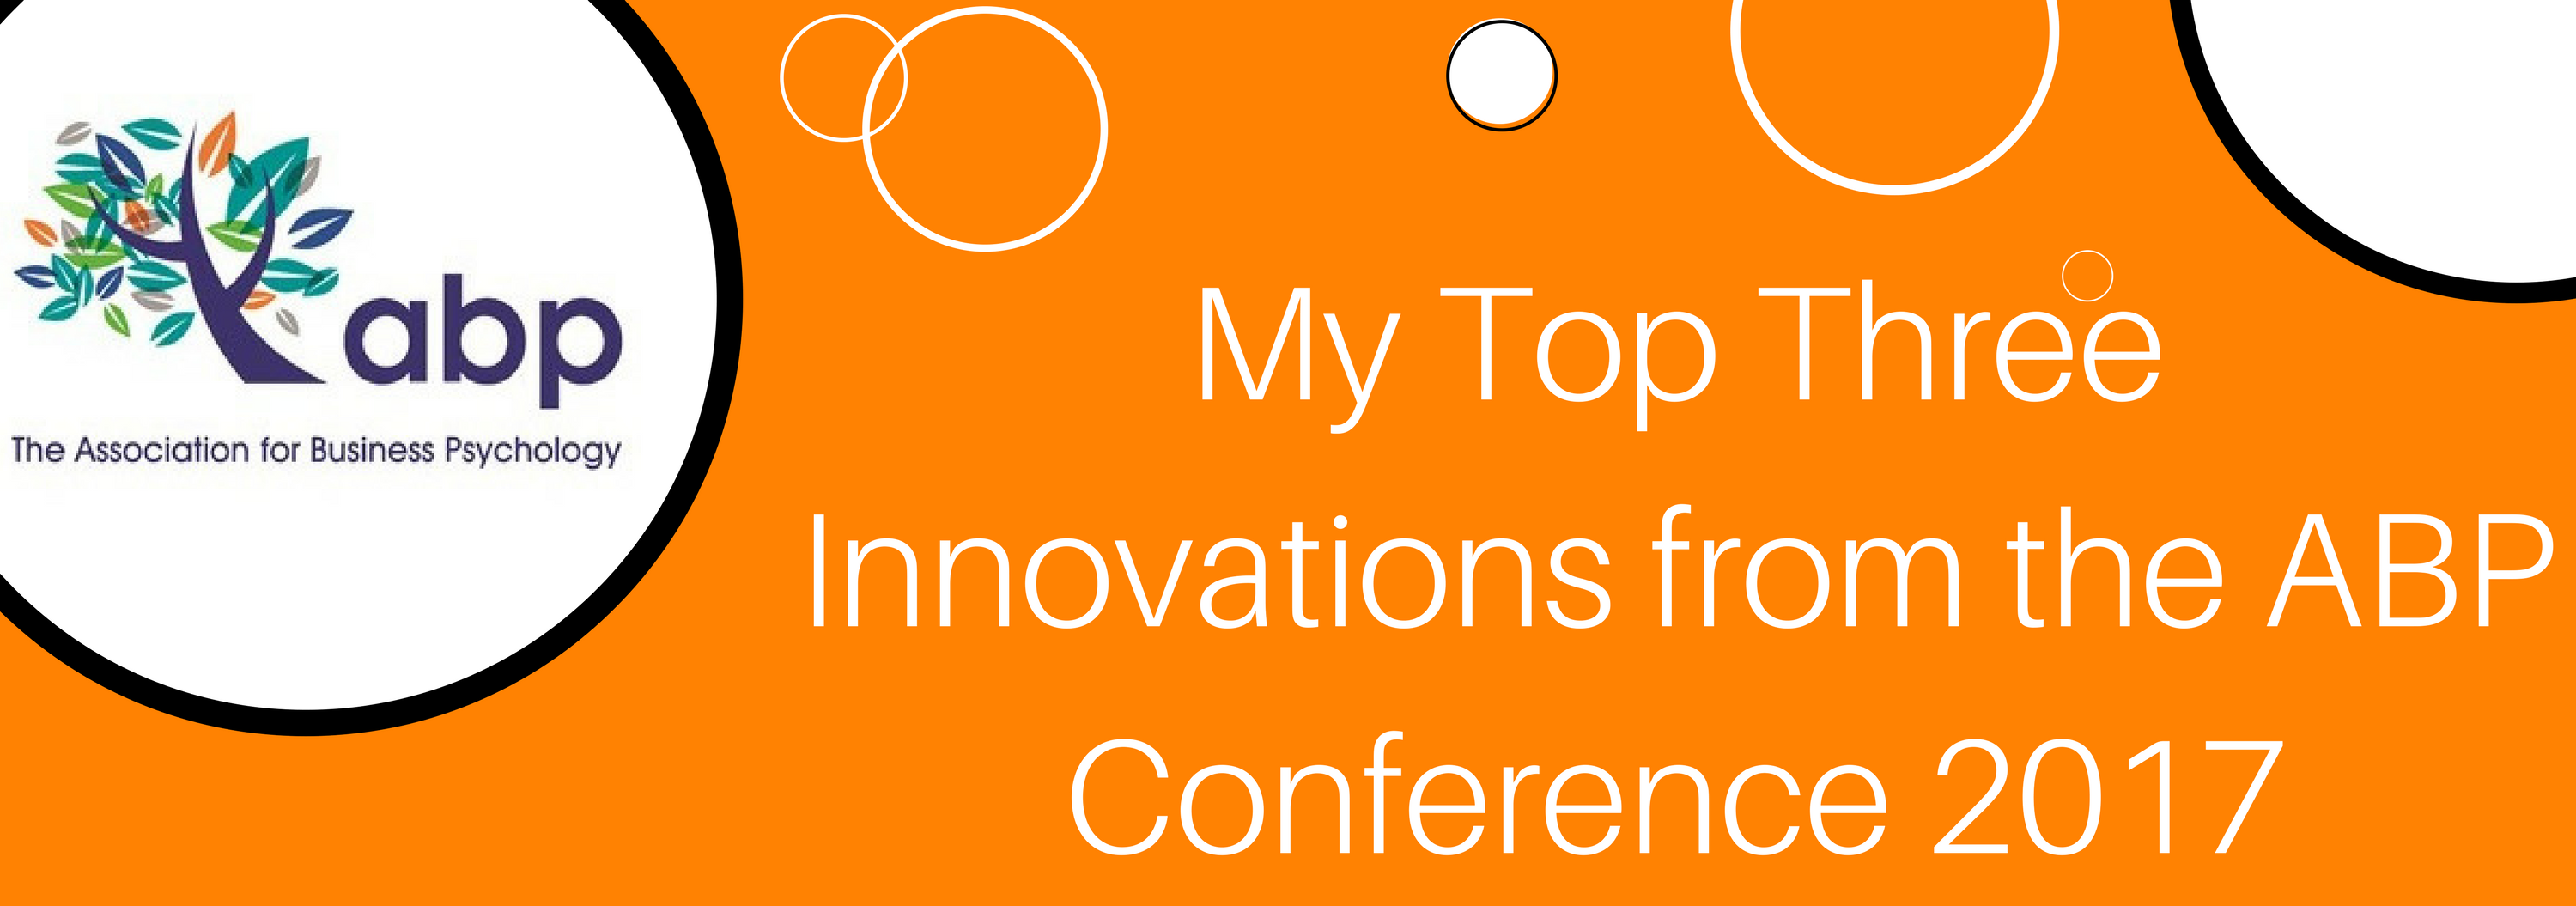 My Top Three Innovations from The ABP Conference 2017